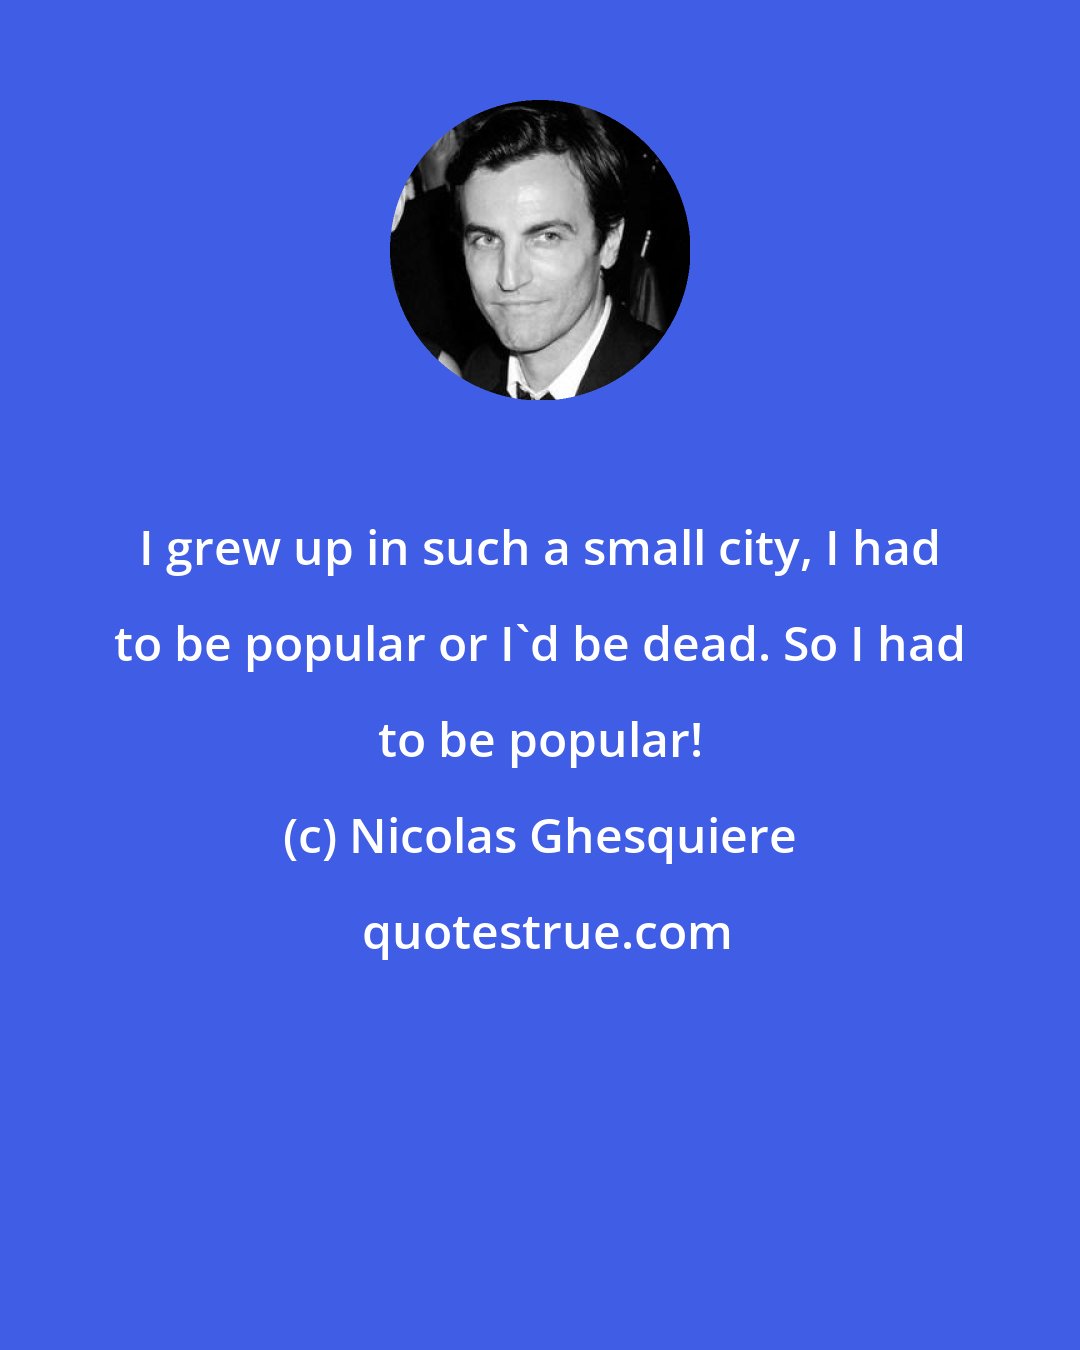 Nicolas Ghesquiere: I grew up in such a small city, I had to be popular or I'd be dead. So I had to be popular!